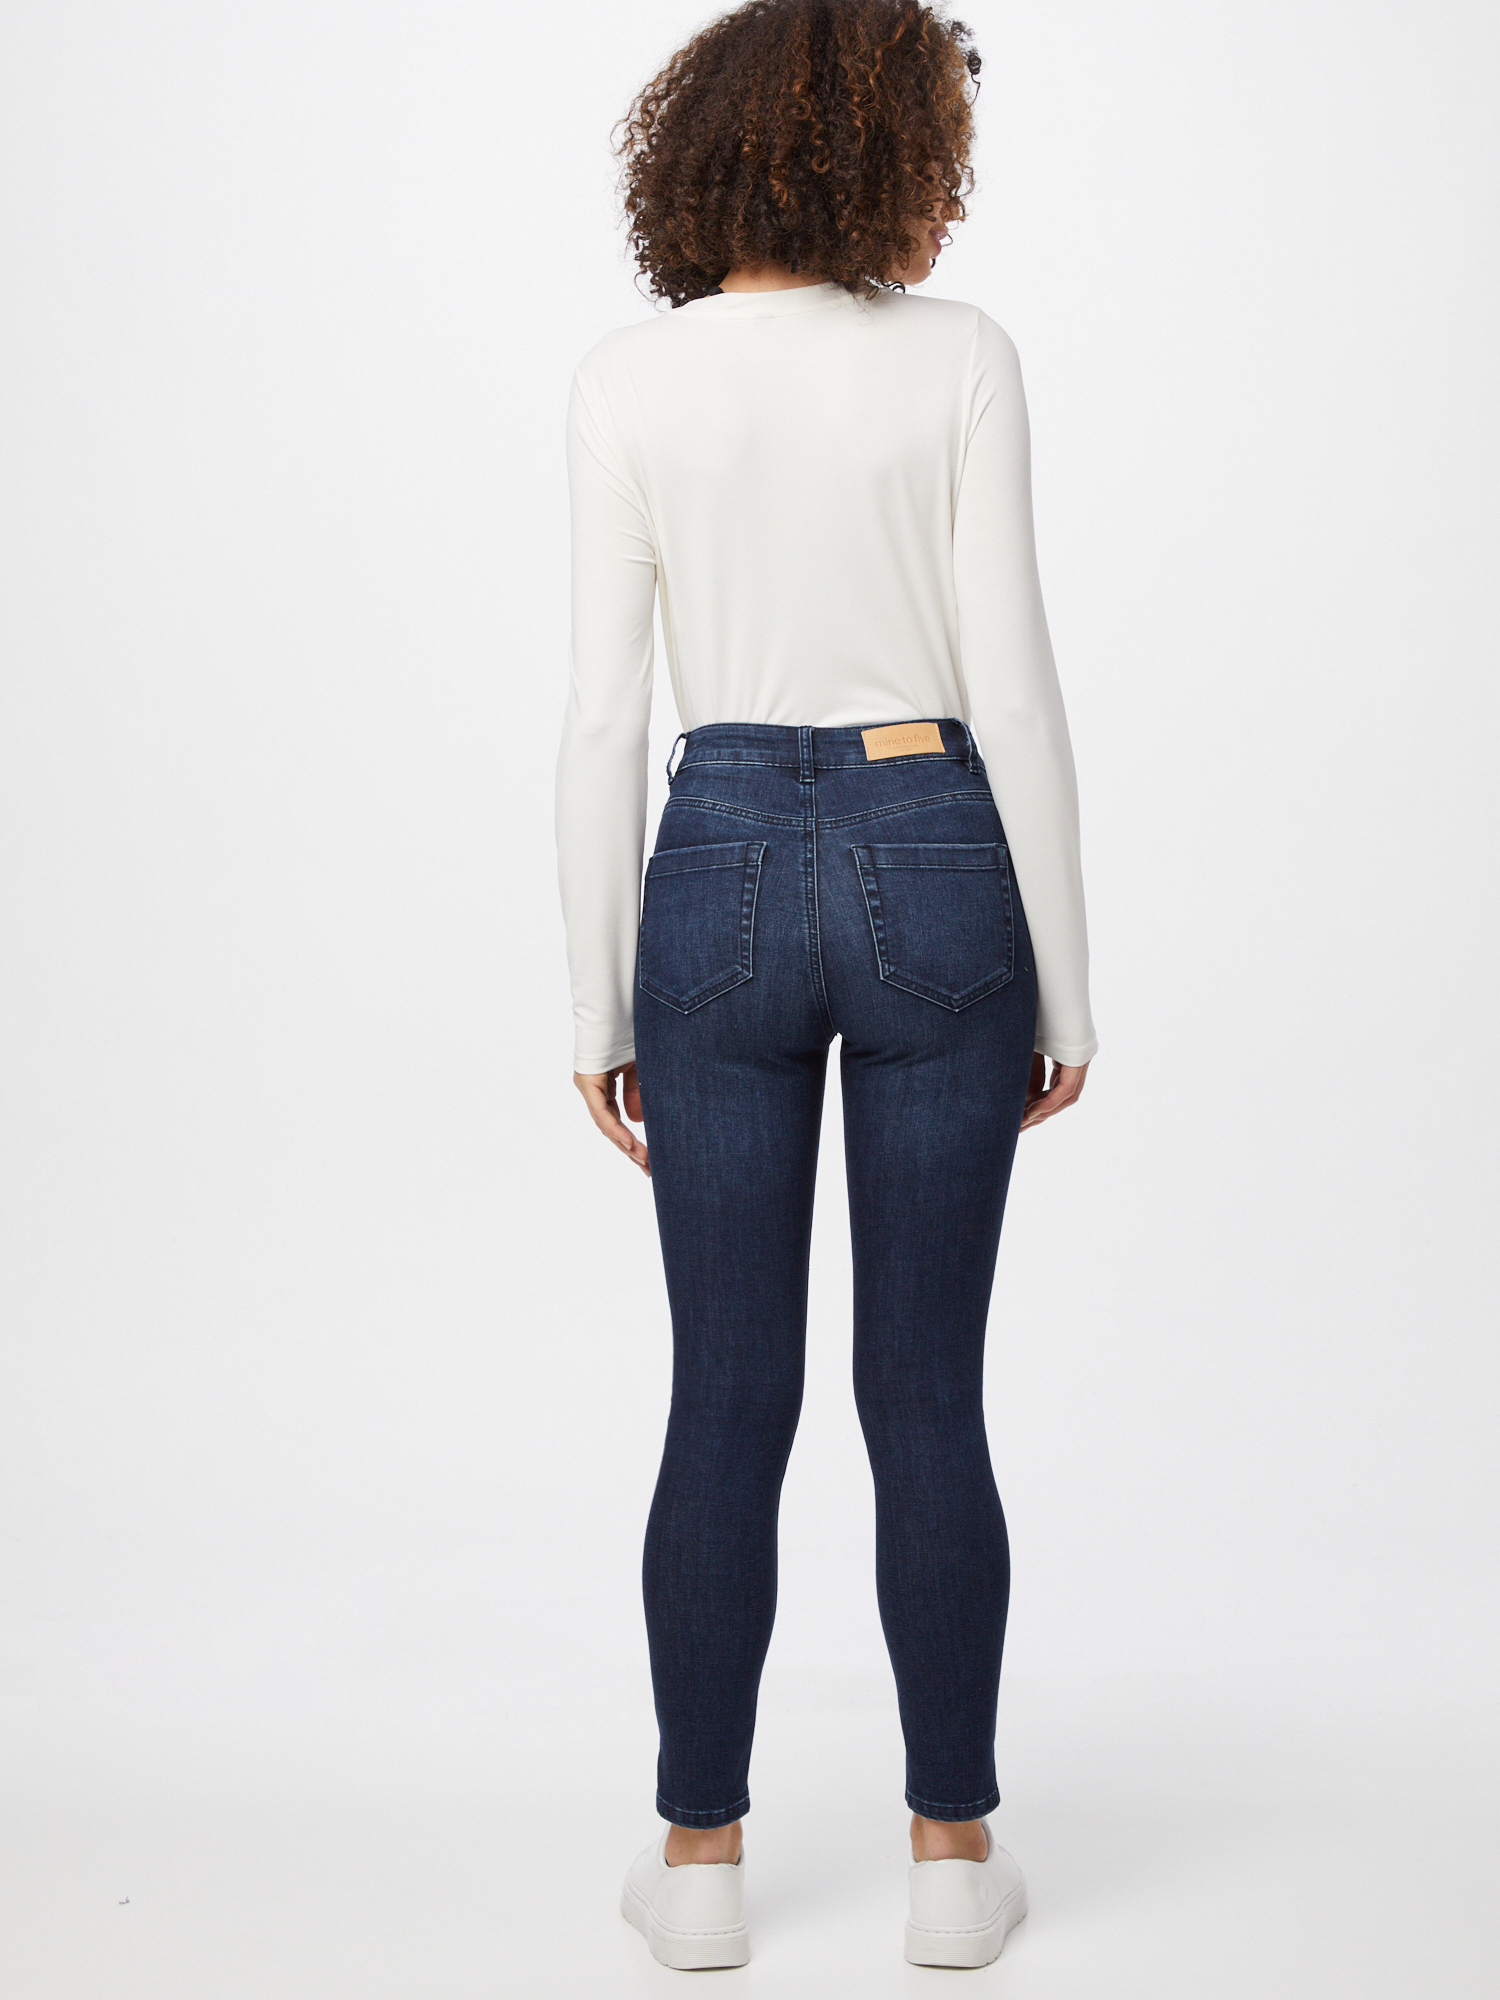 KX6hU Jeans MINE TO FIVE Jeans Kate in Navy 